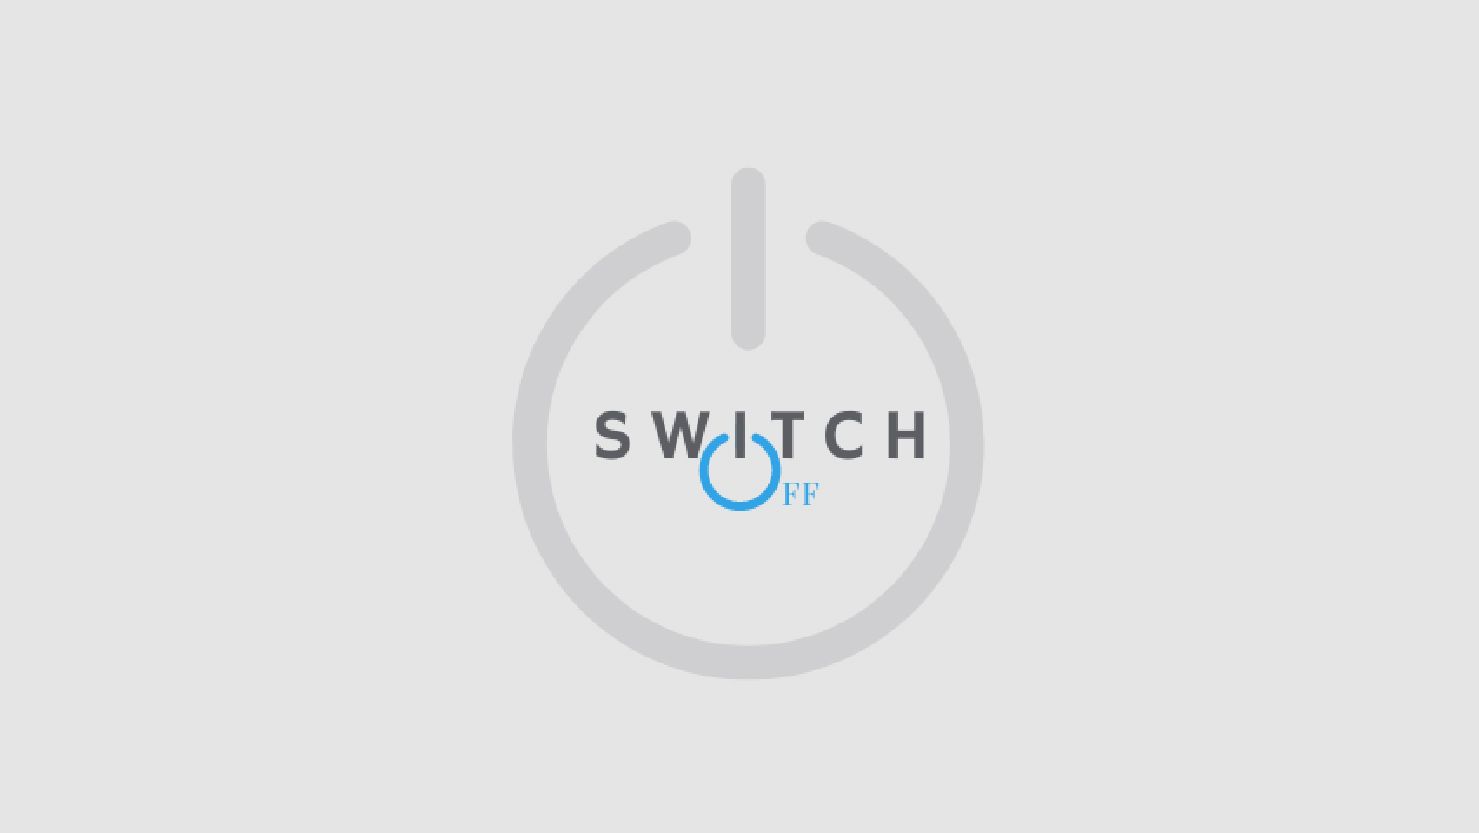 SwitchOff project logo